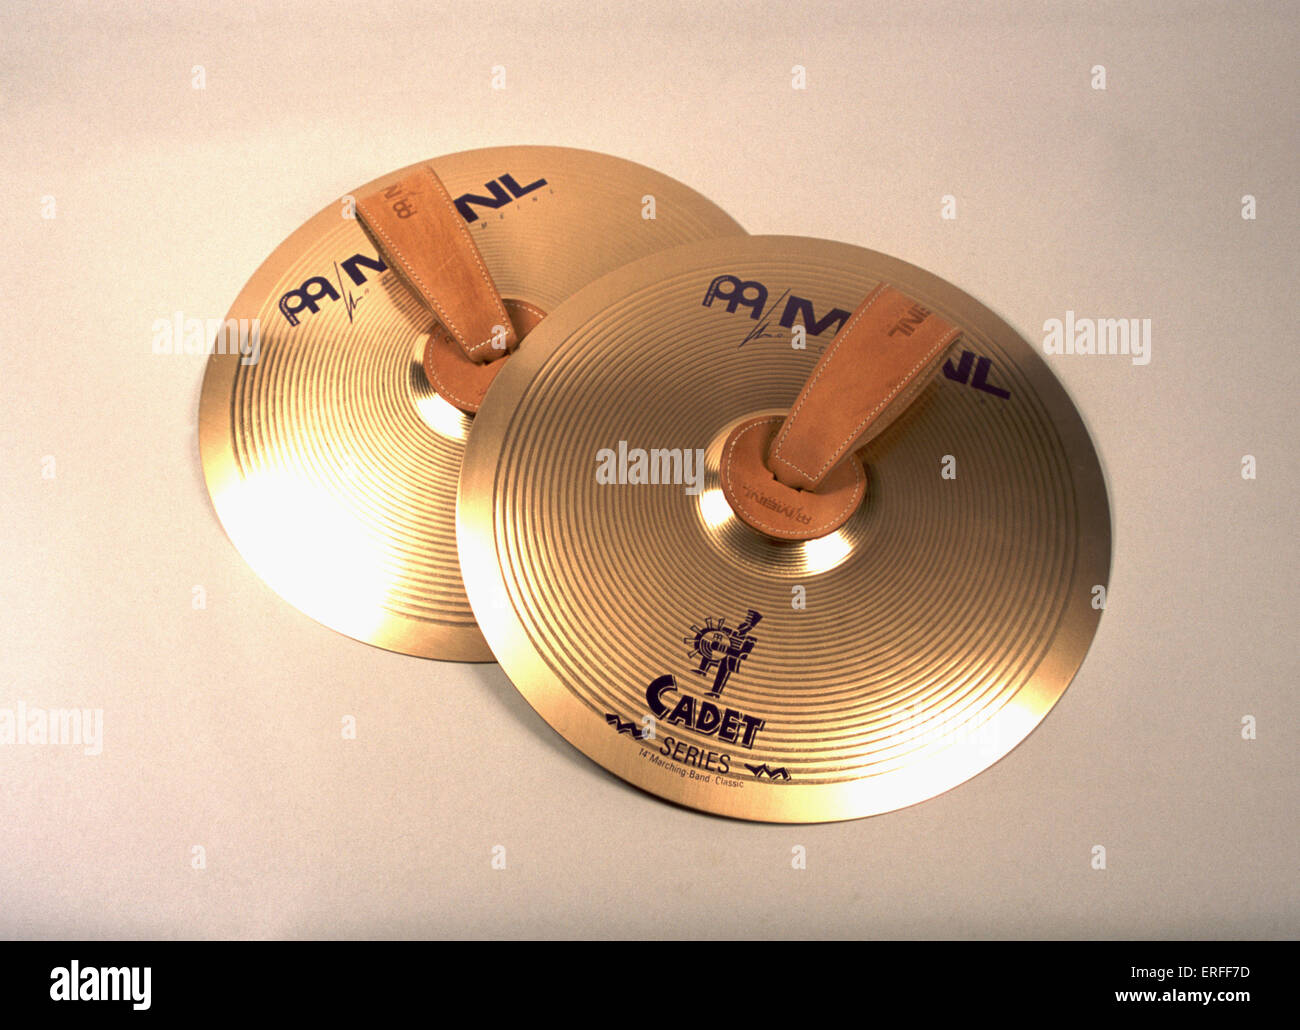 Pair of Cymbals, marching Stock Photo